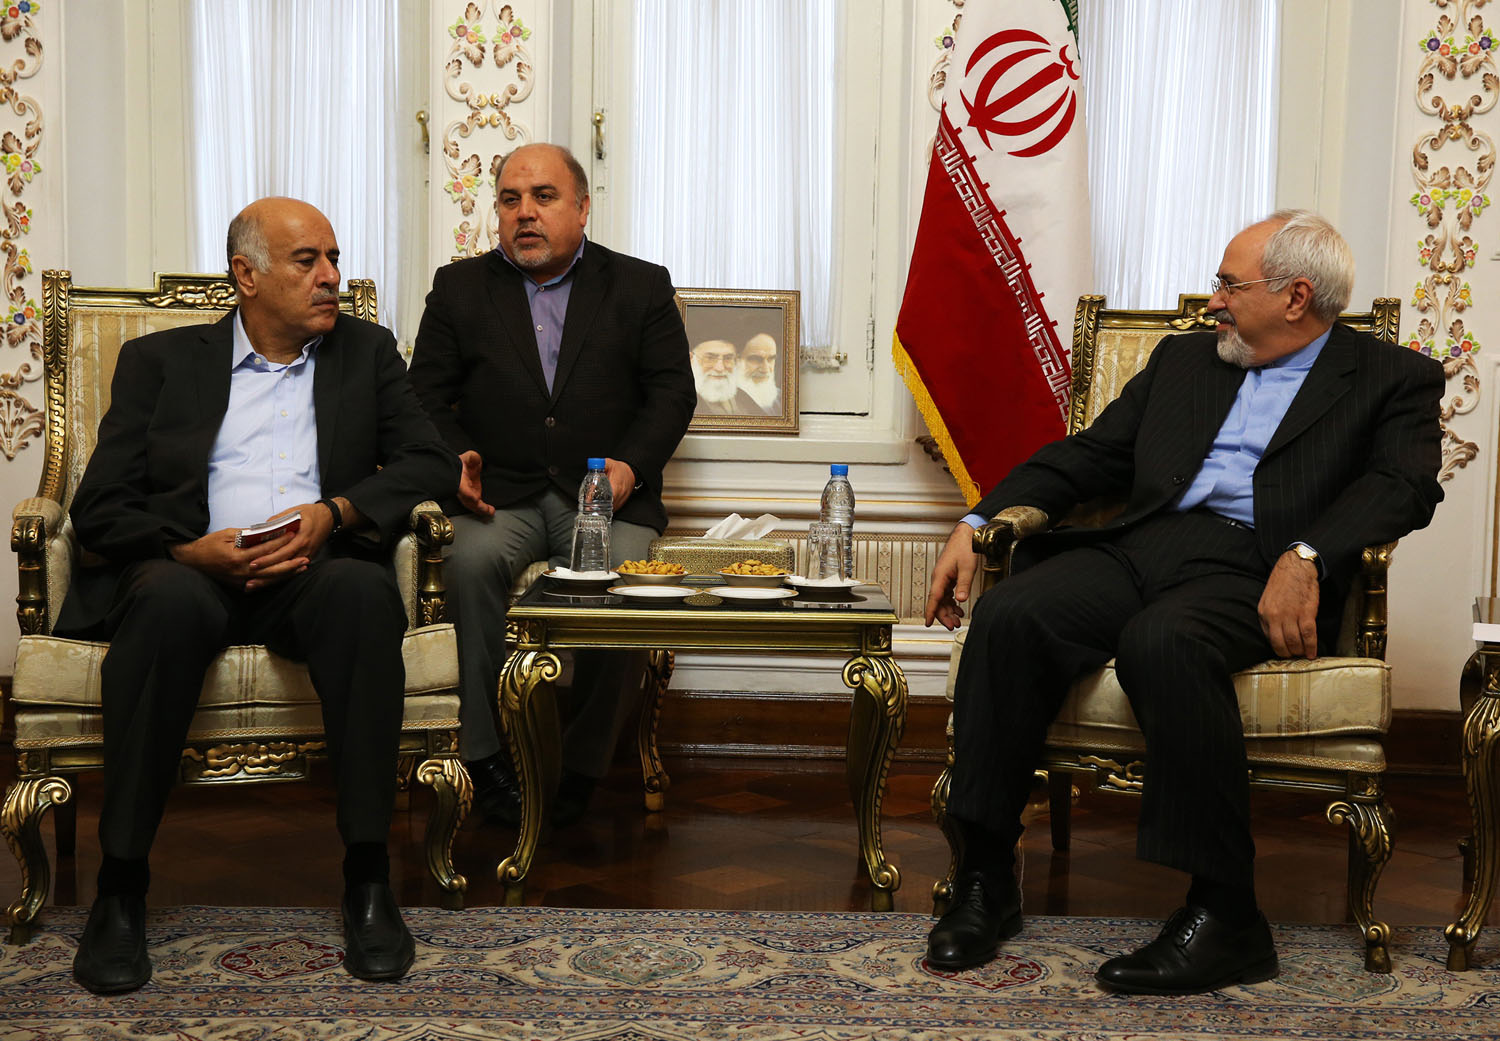 Jibril Rajoub, a senior official in the Palestinian Authority, left, meets with Iranian Foreign Minister Mohammad Javad Zarif in Tehran on Jan. 28, 2014 (Azin Haghighi&mdash;AFP/Getty Images)